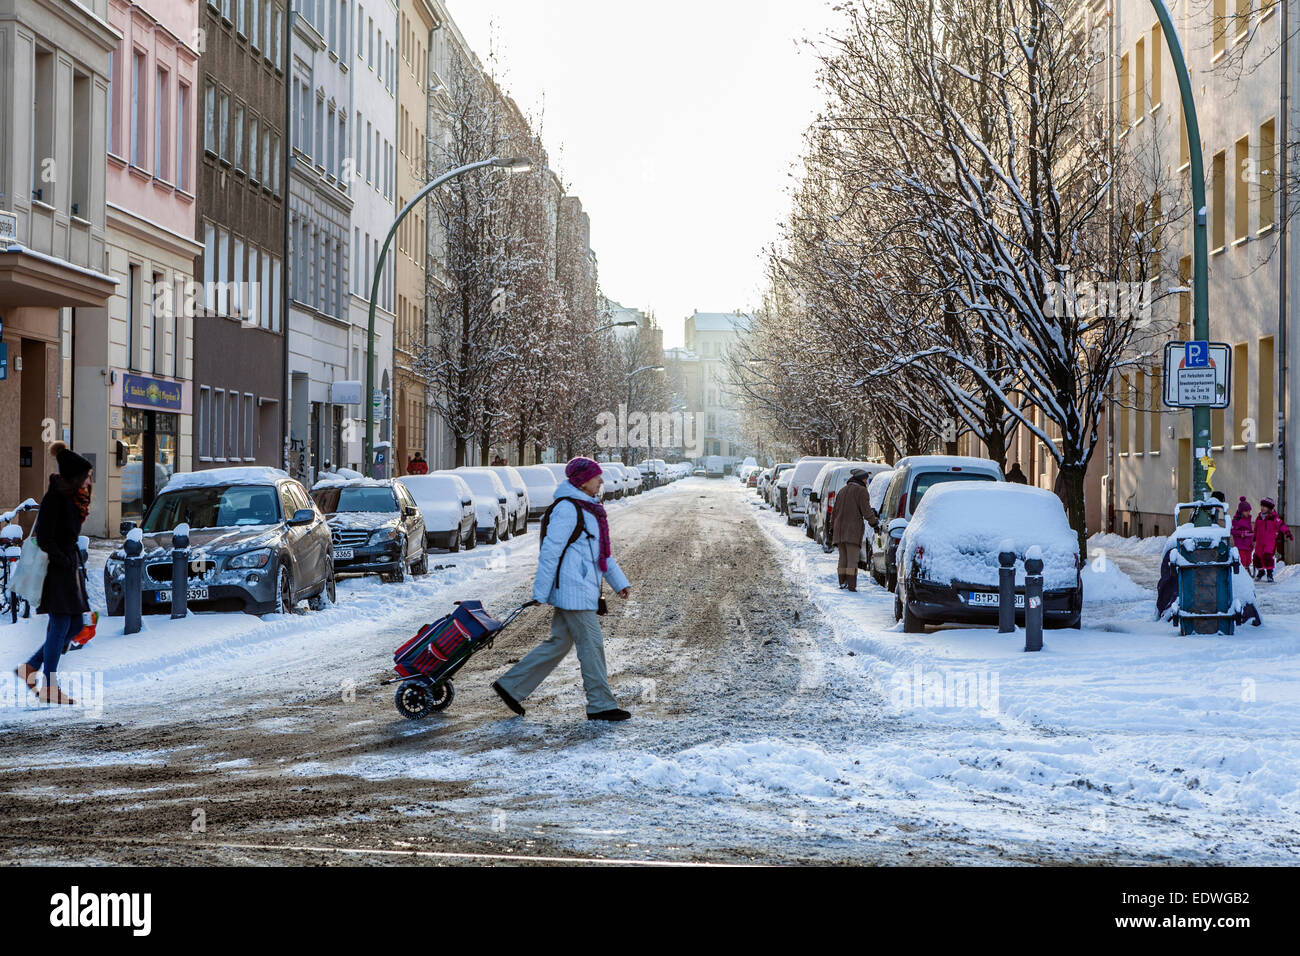 Berlin city street after snow in winter, apartment buildings, snow covered cars and people walking, Bergstrasse, Mitte, Berlin Stock Photo